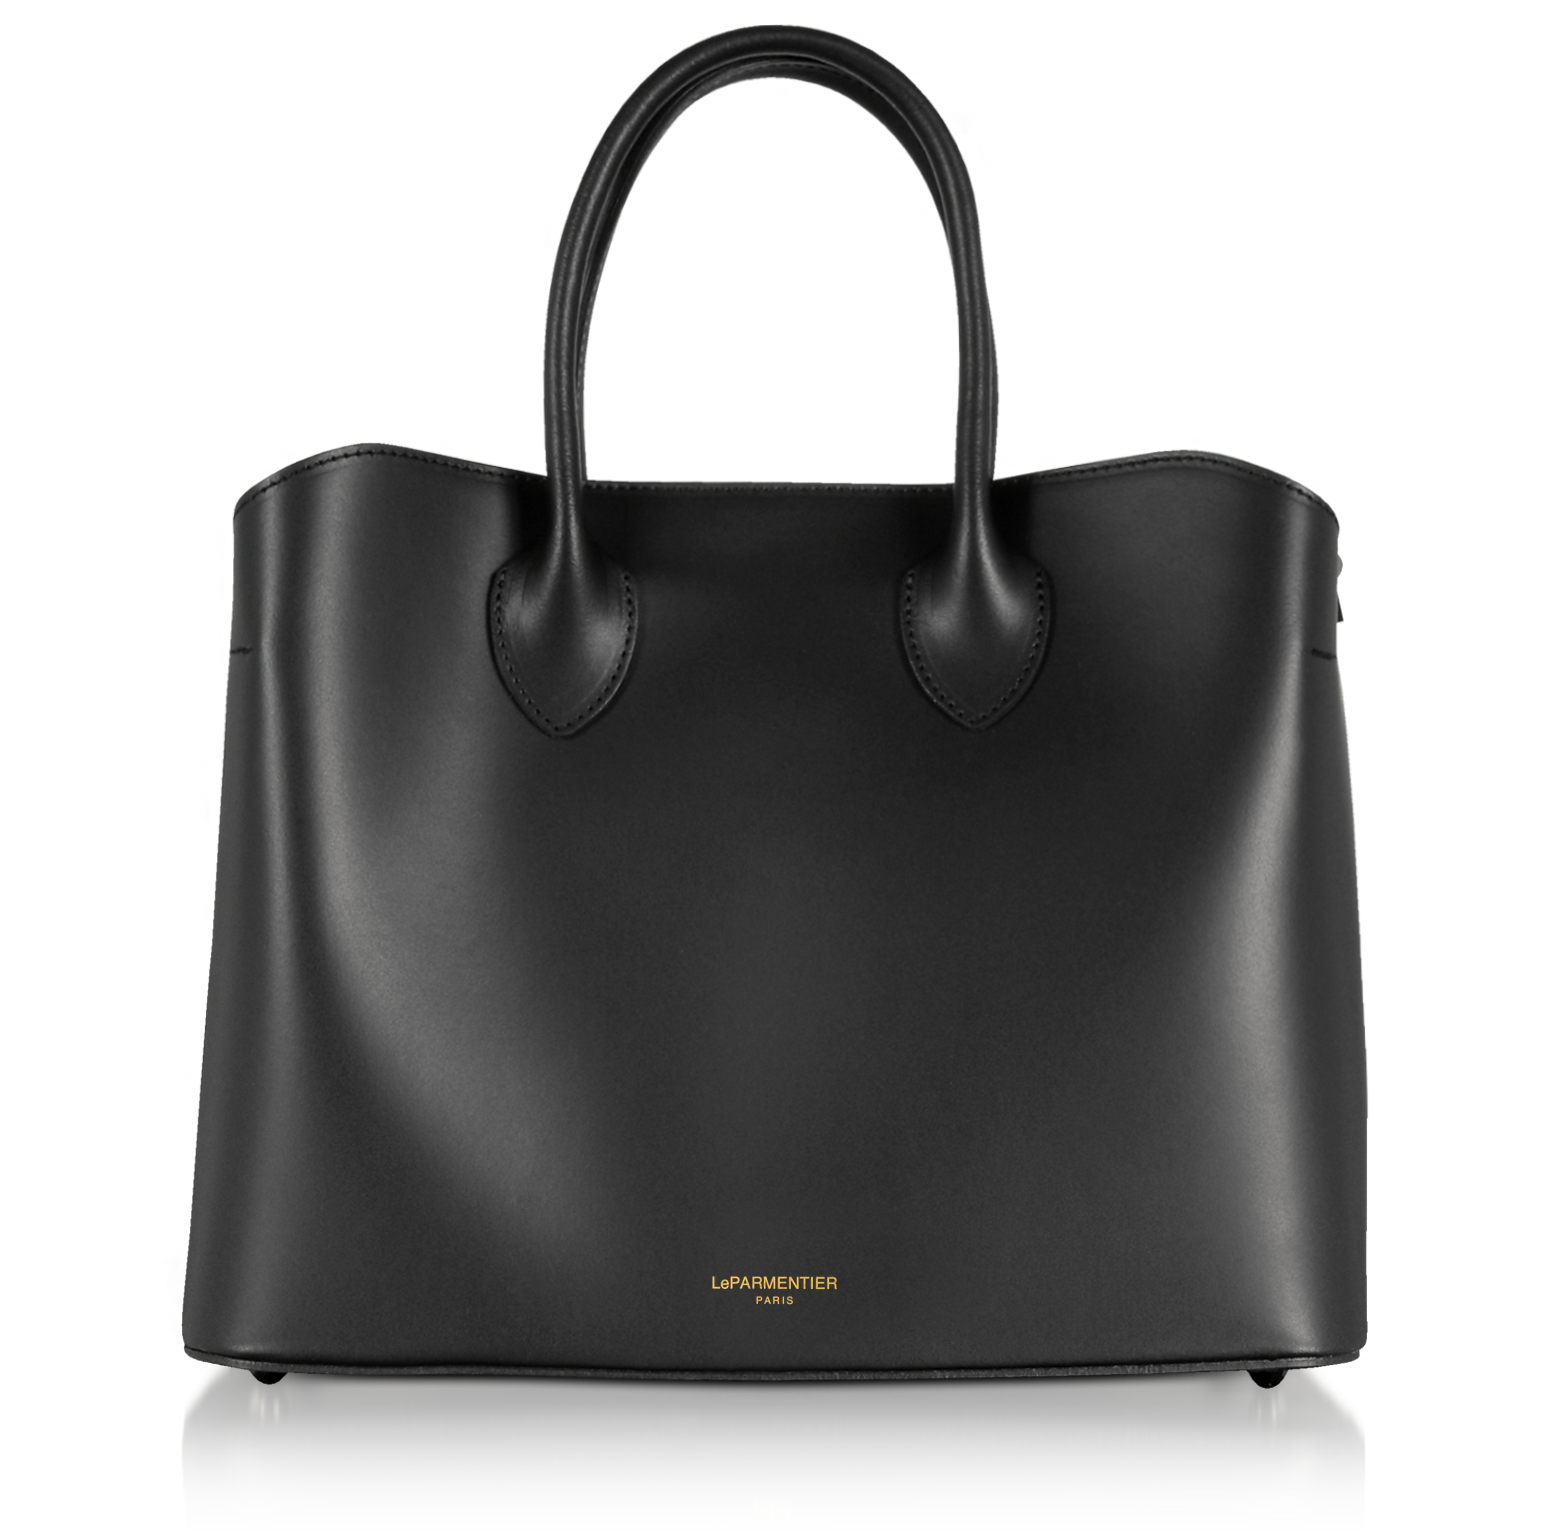 Le Parmentier Caviar Black Jackie Leather Tote Bag at FORZIERI